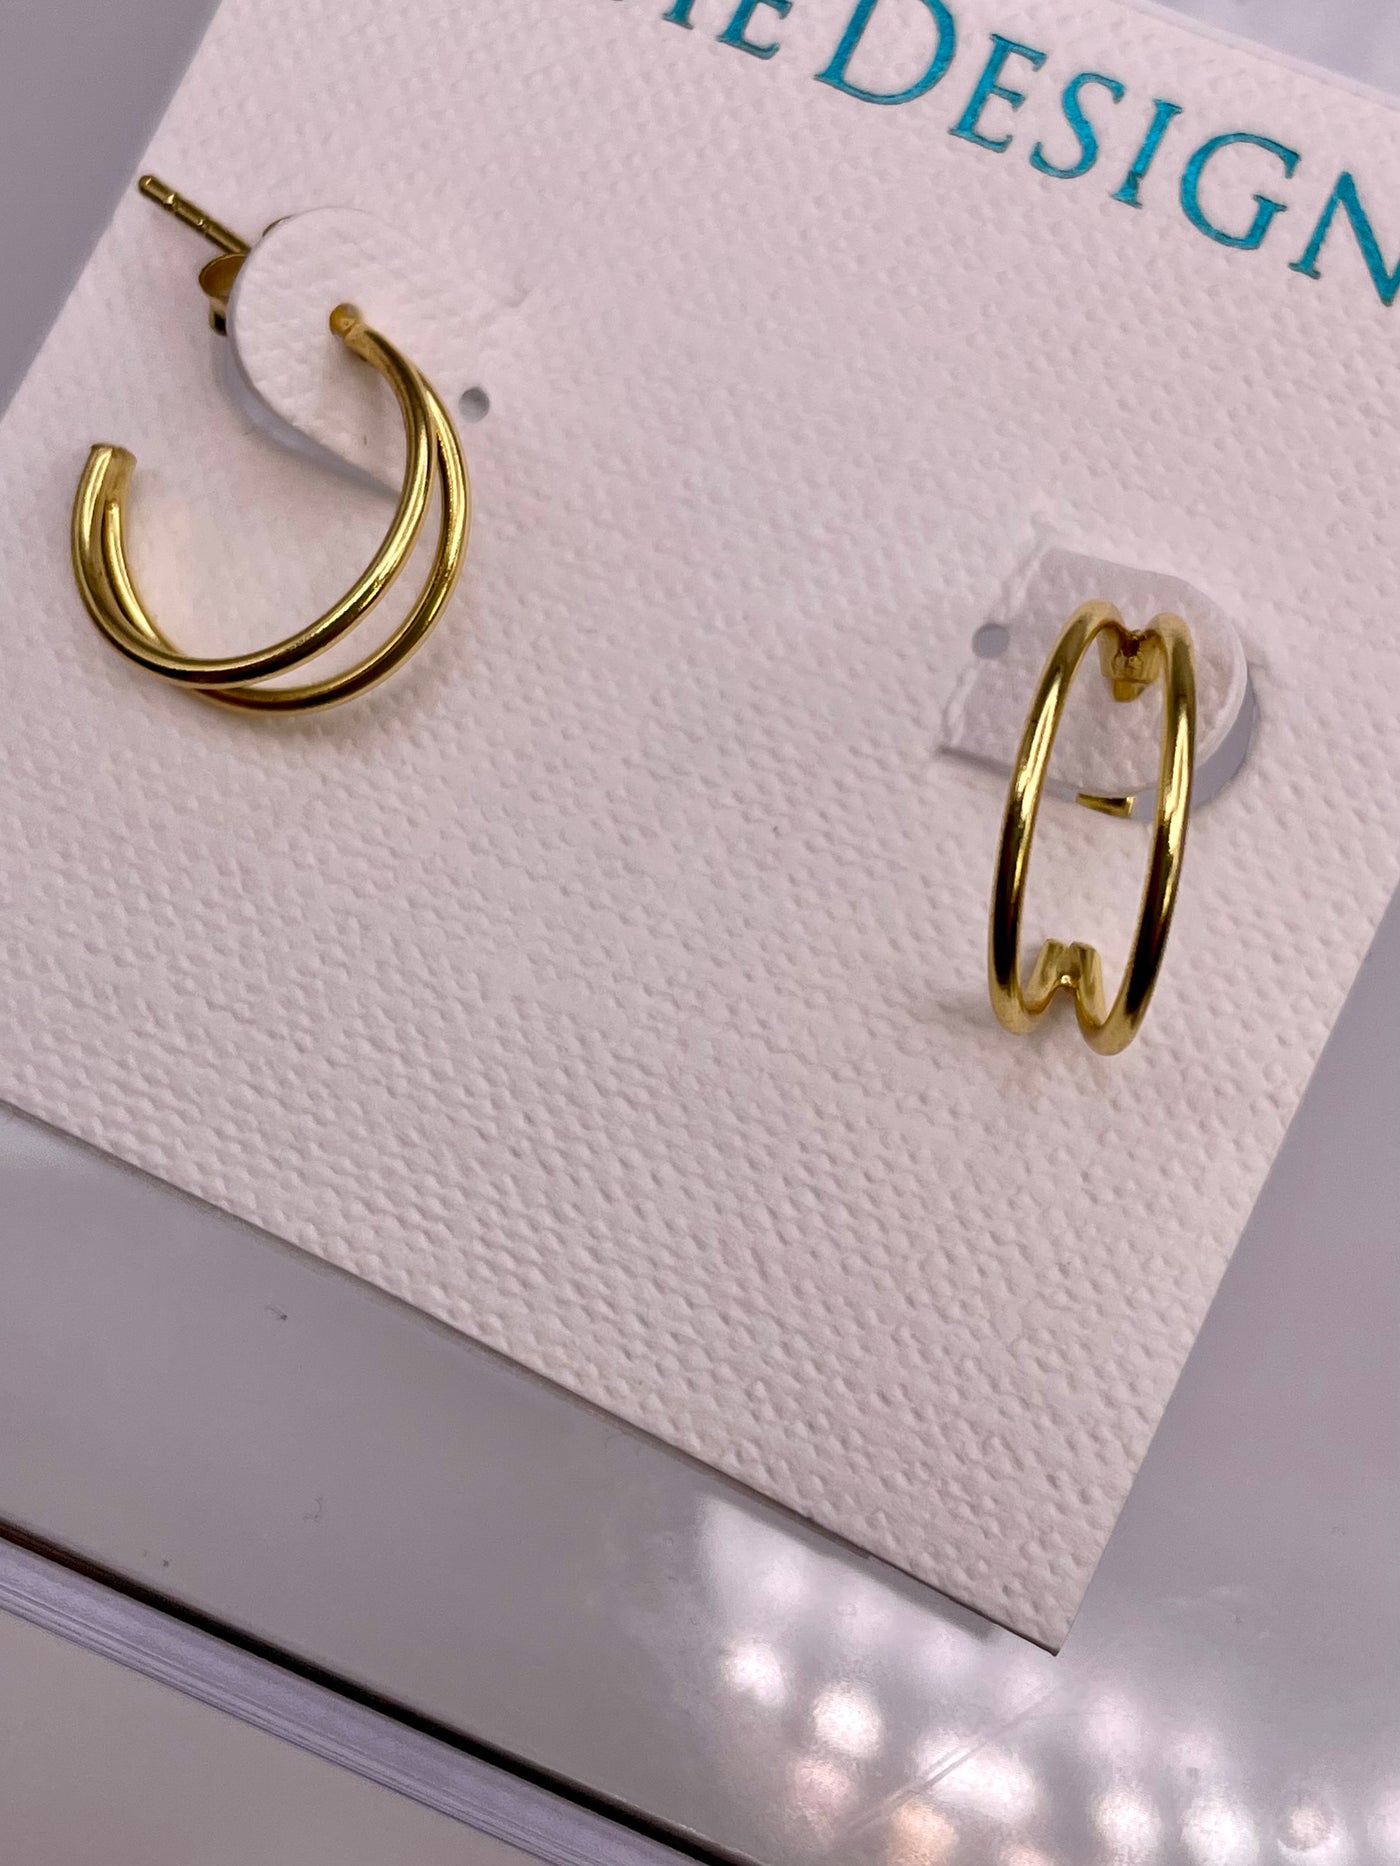 gold double hoop huggie earring small woman owned business made in the USA gold over sterling silver handmade. Modern smart causal female chic effortless outfit womens ladies gift elegant effortless clothing clothes apparel outfits chic summer style women’s boutique trendy cute plus size wedding guest outfit